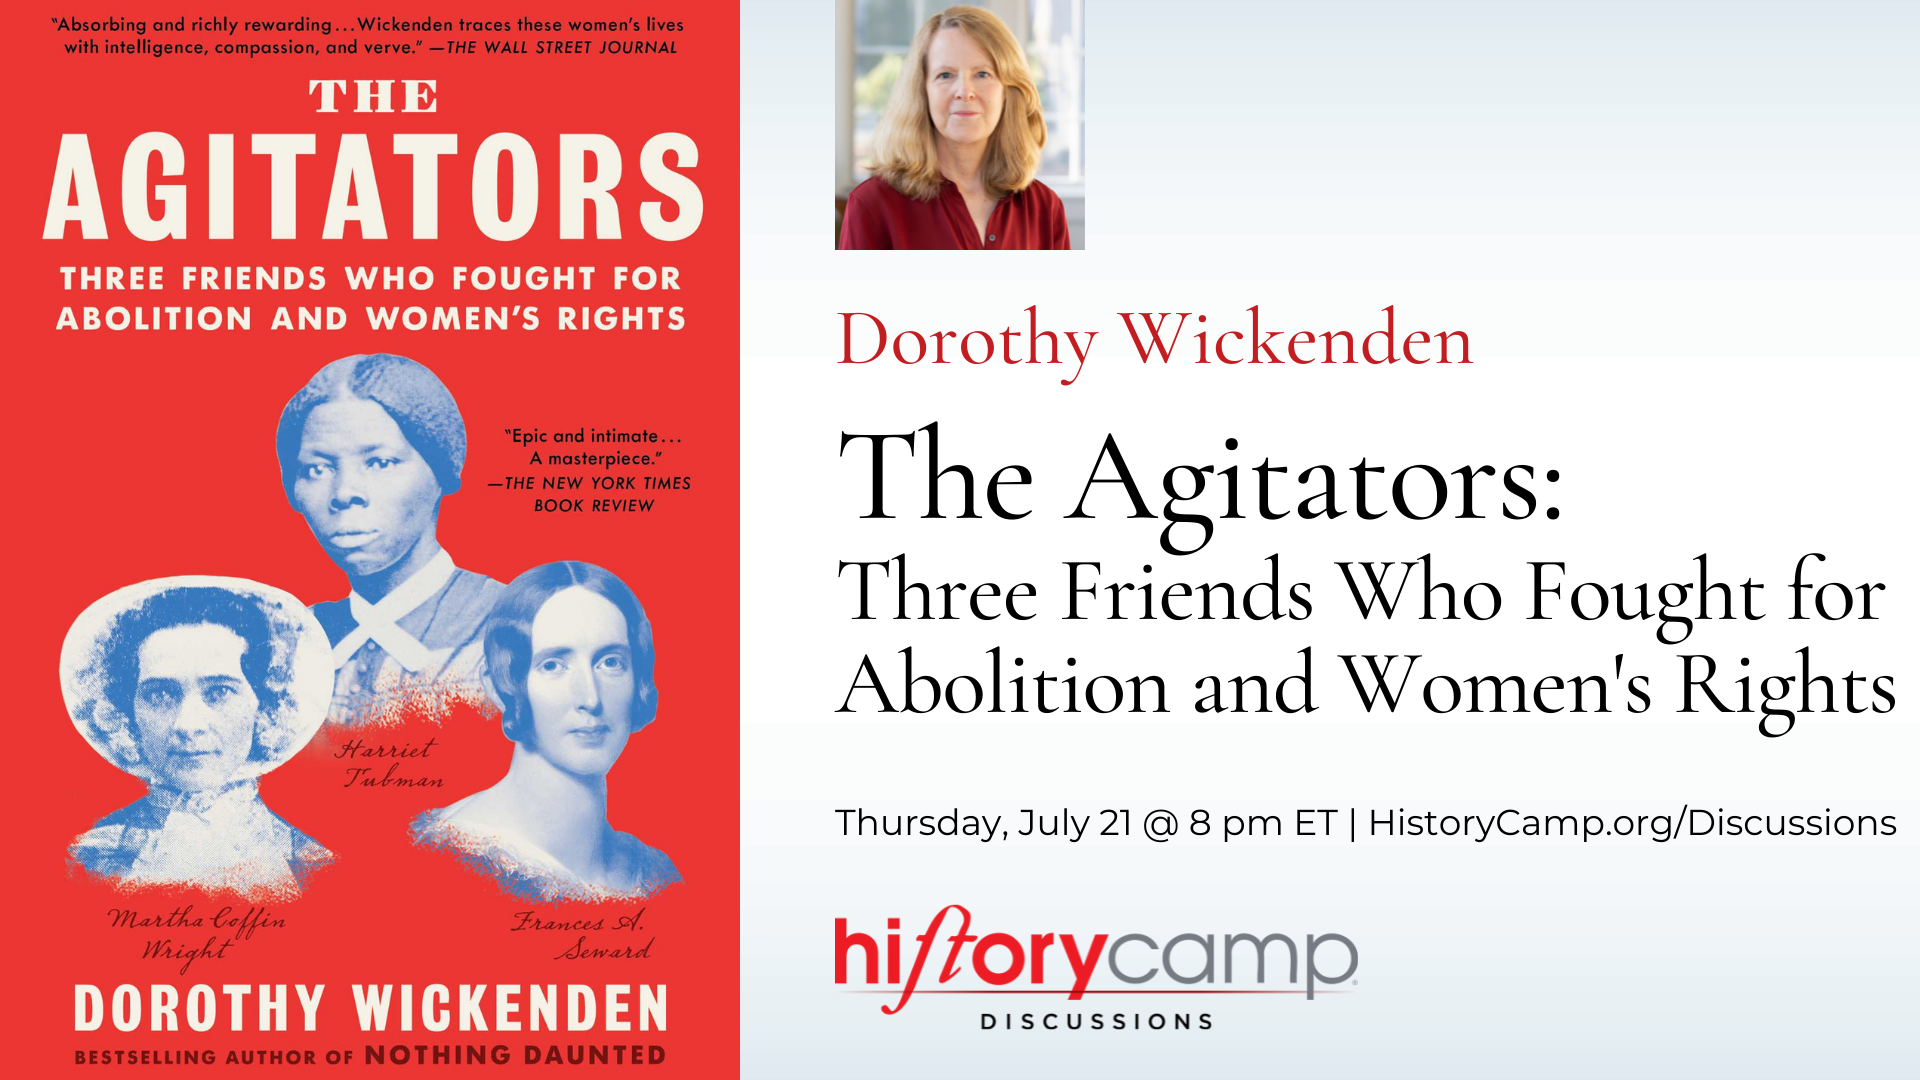 History Camp Discussion with Dorothy Wickenden - The Agitators